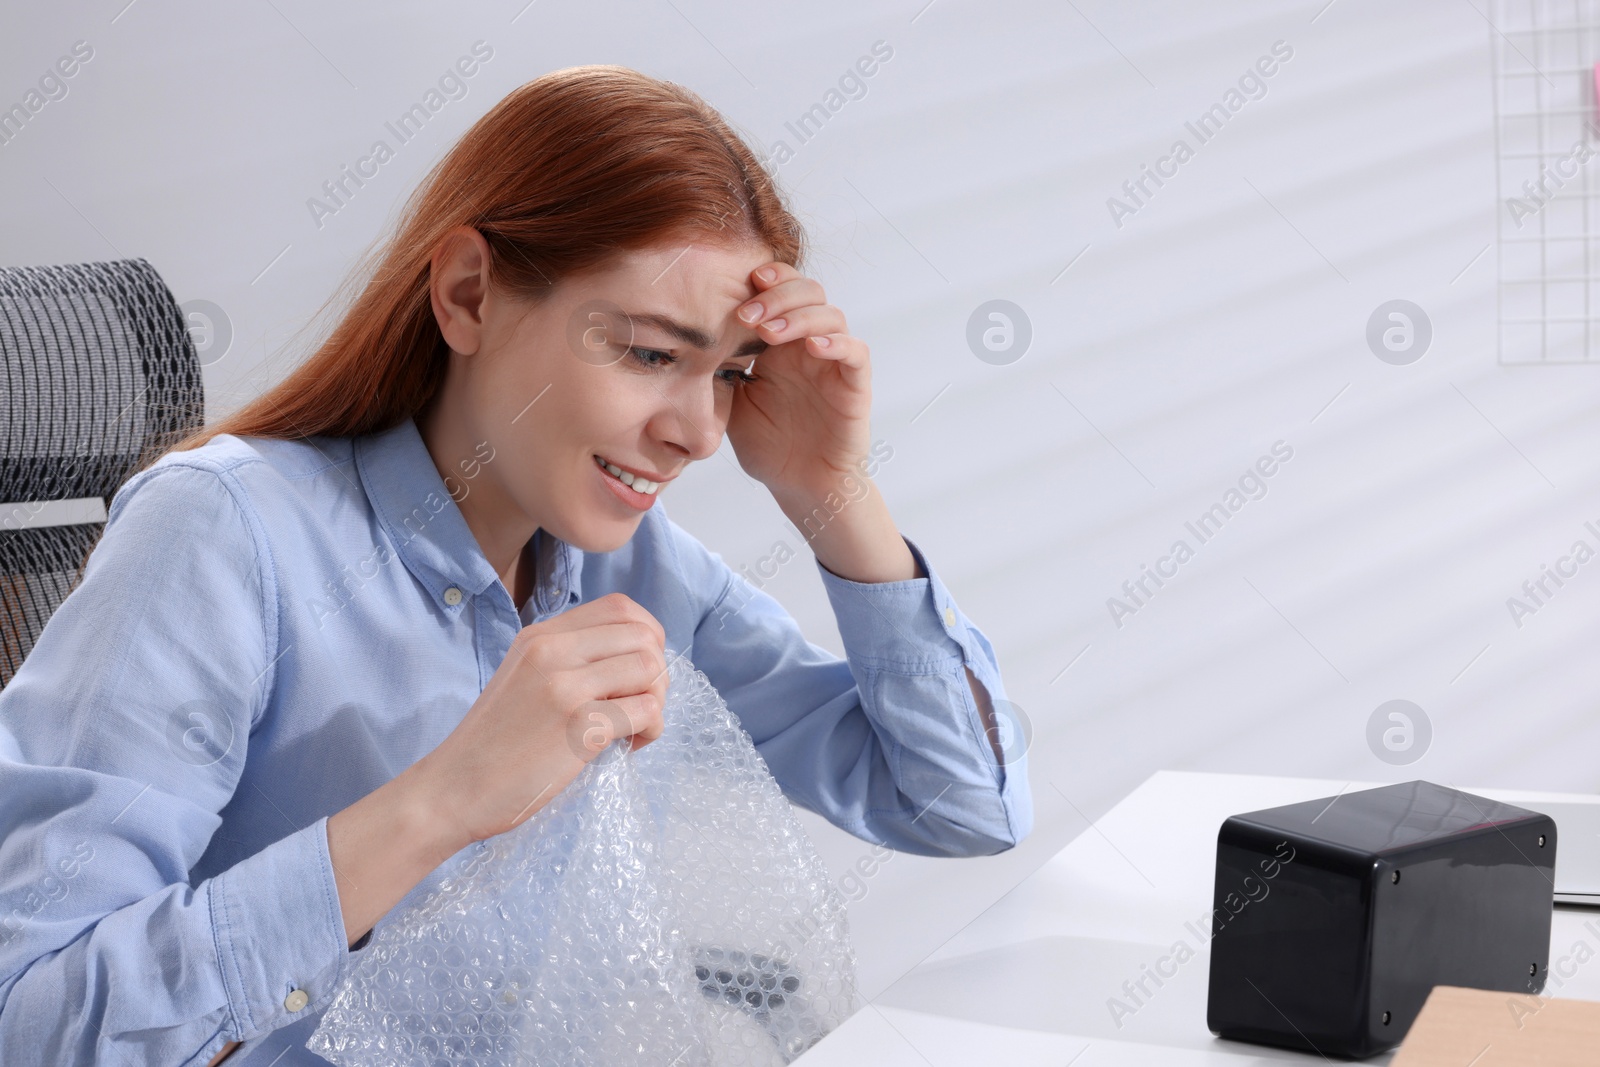 Photo of Emotional woman popping bubble wrap at desk in office. Stress relief